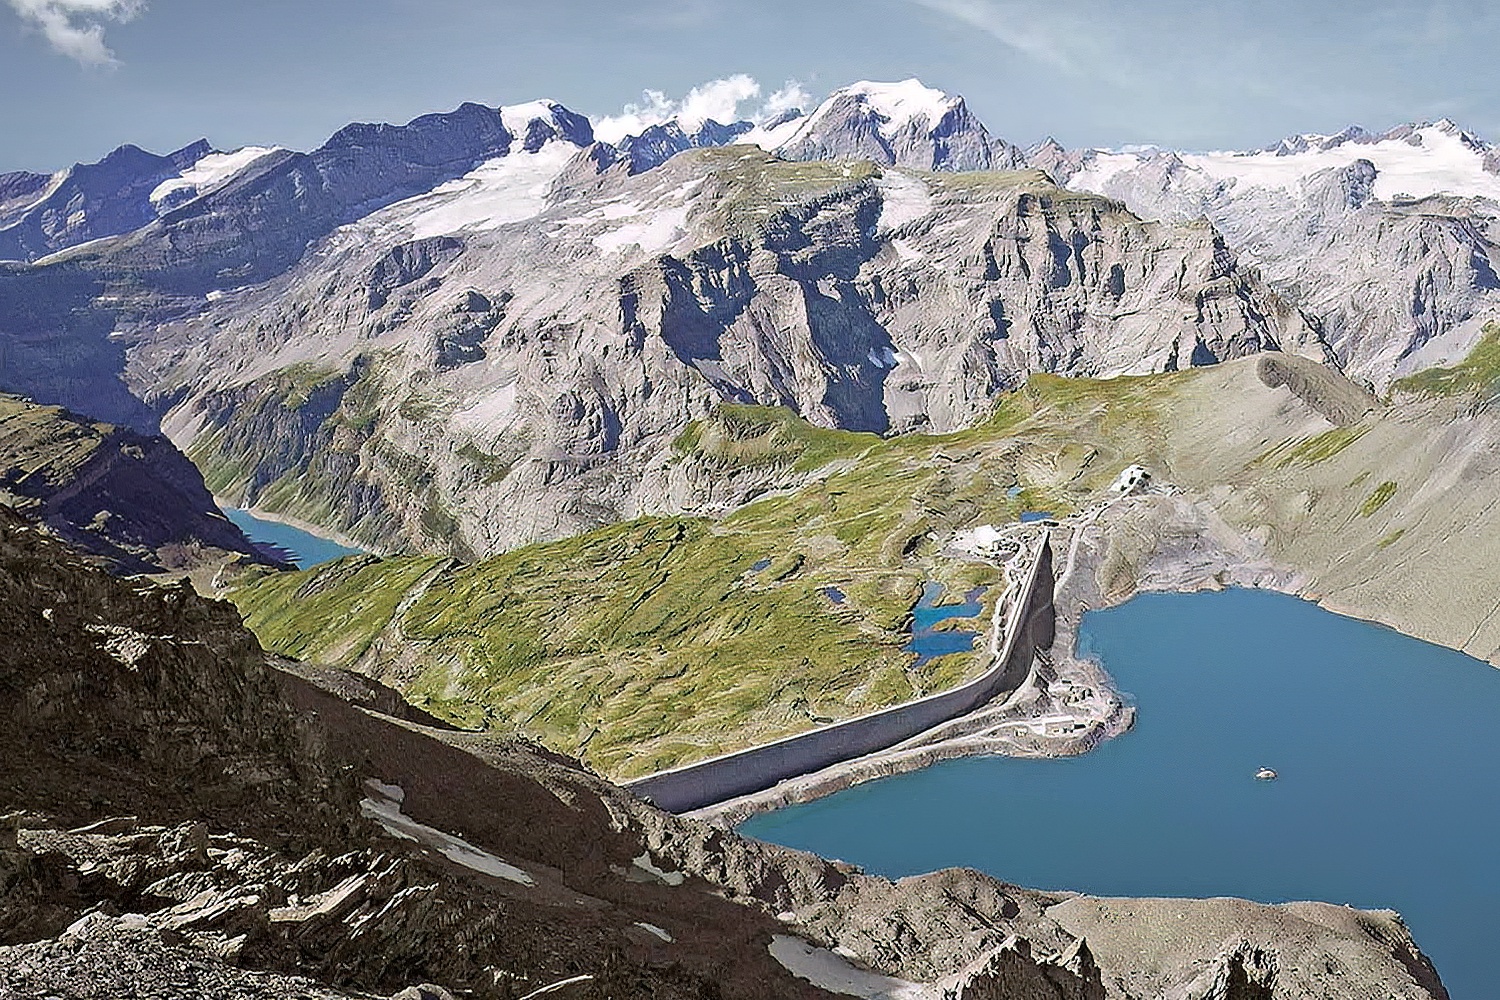 panoramic view of a hydroelectric reservoir